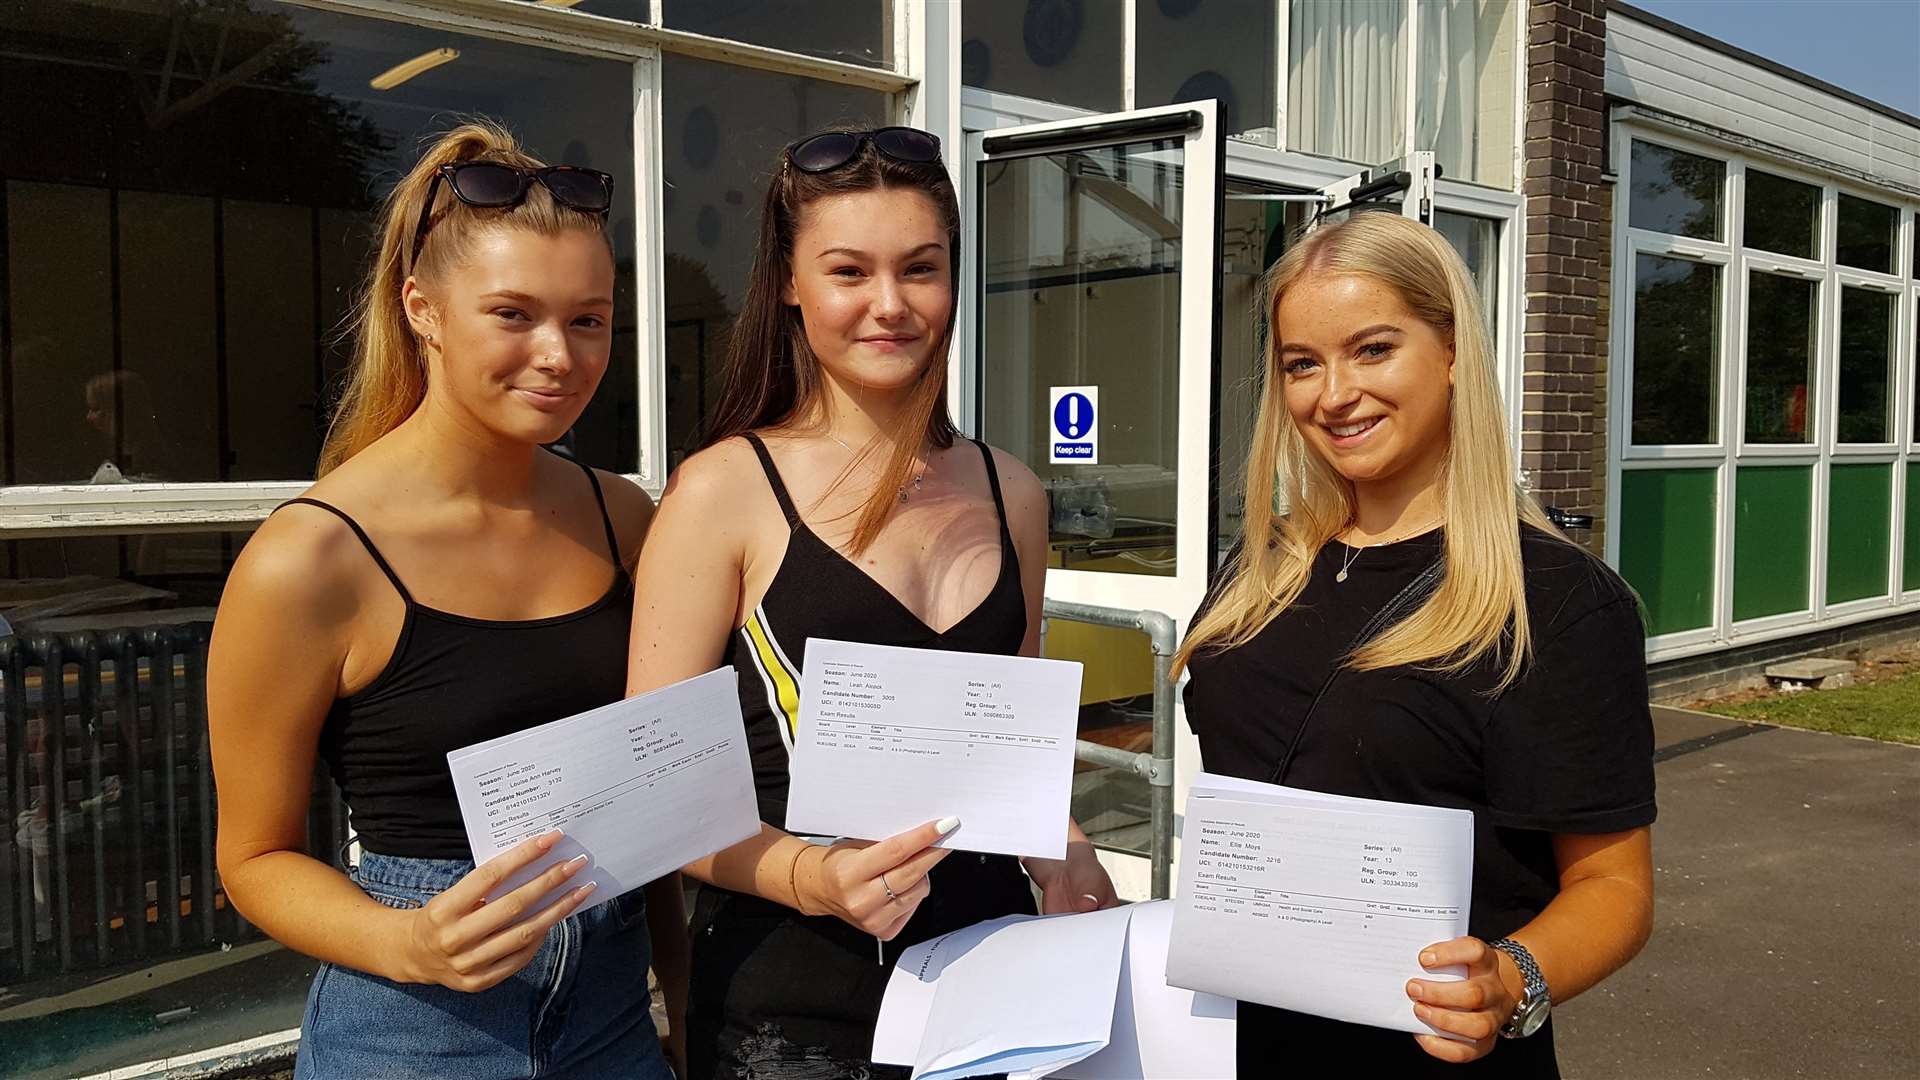 St Anselm's pupils Louise Harvey, Leah Alcock, and Ellie Moyes, who are all 'very pleased' with their results